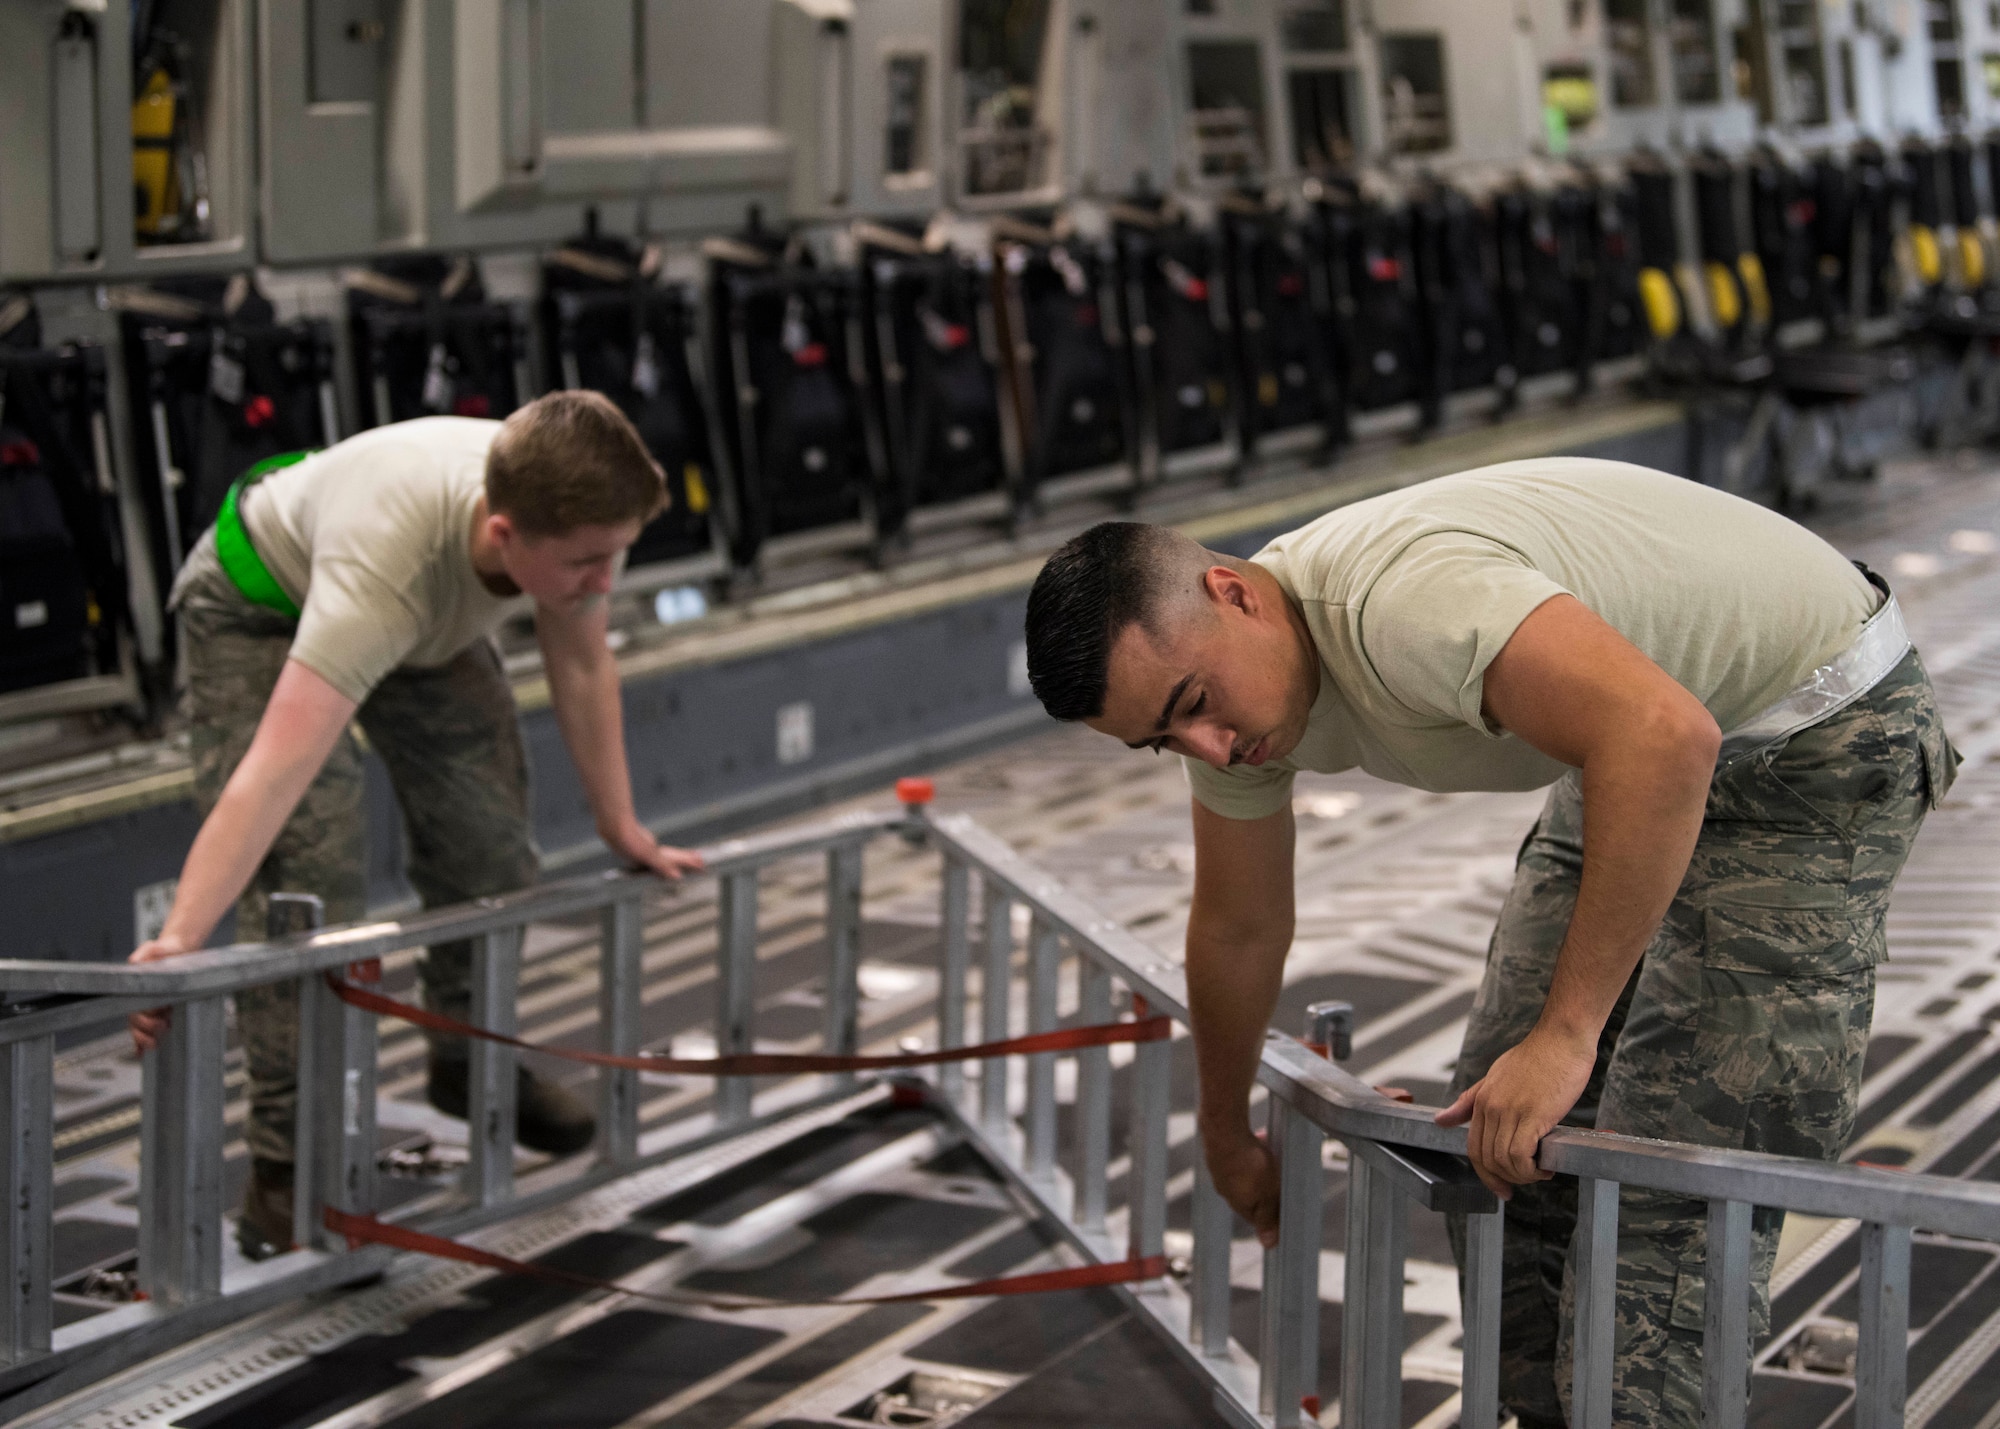 U.S. Air Force Staff Sgt. Caleb Langel, a 517th Aircraft Maintenance Unit C-17 Globemaster III dedicated crew chief, folds up a ladder with Senior Airmen Melanie Hansen, a 517th AMU aerospace maintenance journeyman, during an inspection at Joint Base Elmendorf-Richardson, Alaska, July 26, 2018. Langel and Hansen are responsible for service and repair on everything coming back from daily inspections, to include checking the pressure gauges on life rafts to ensure they meet specifications to fully inflate if needed.